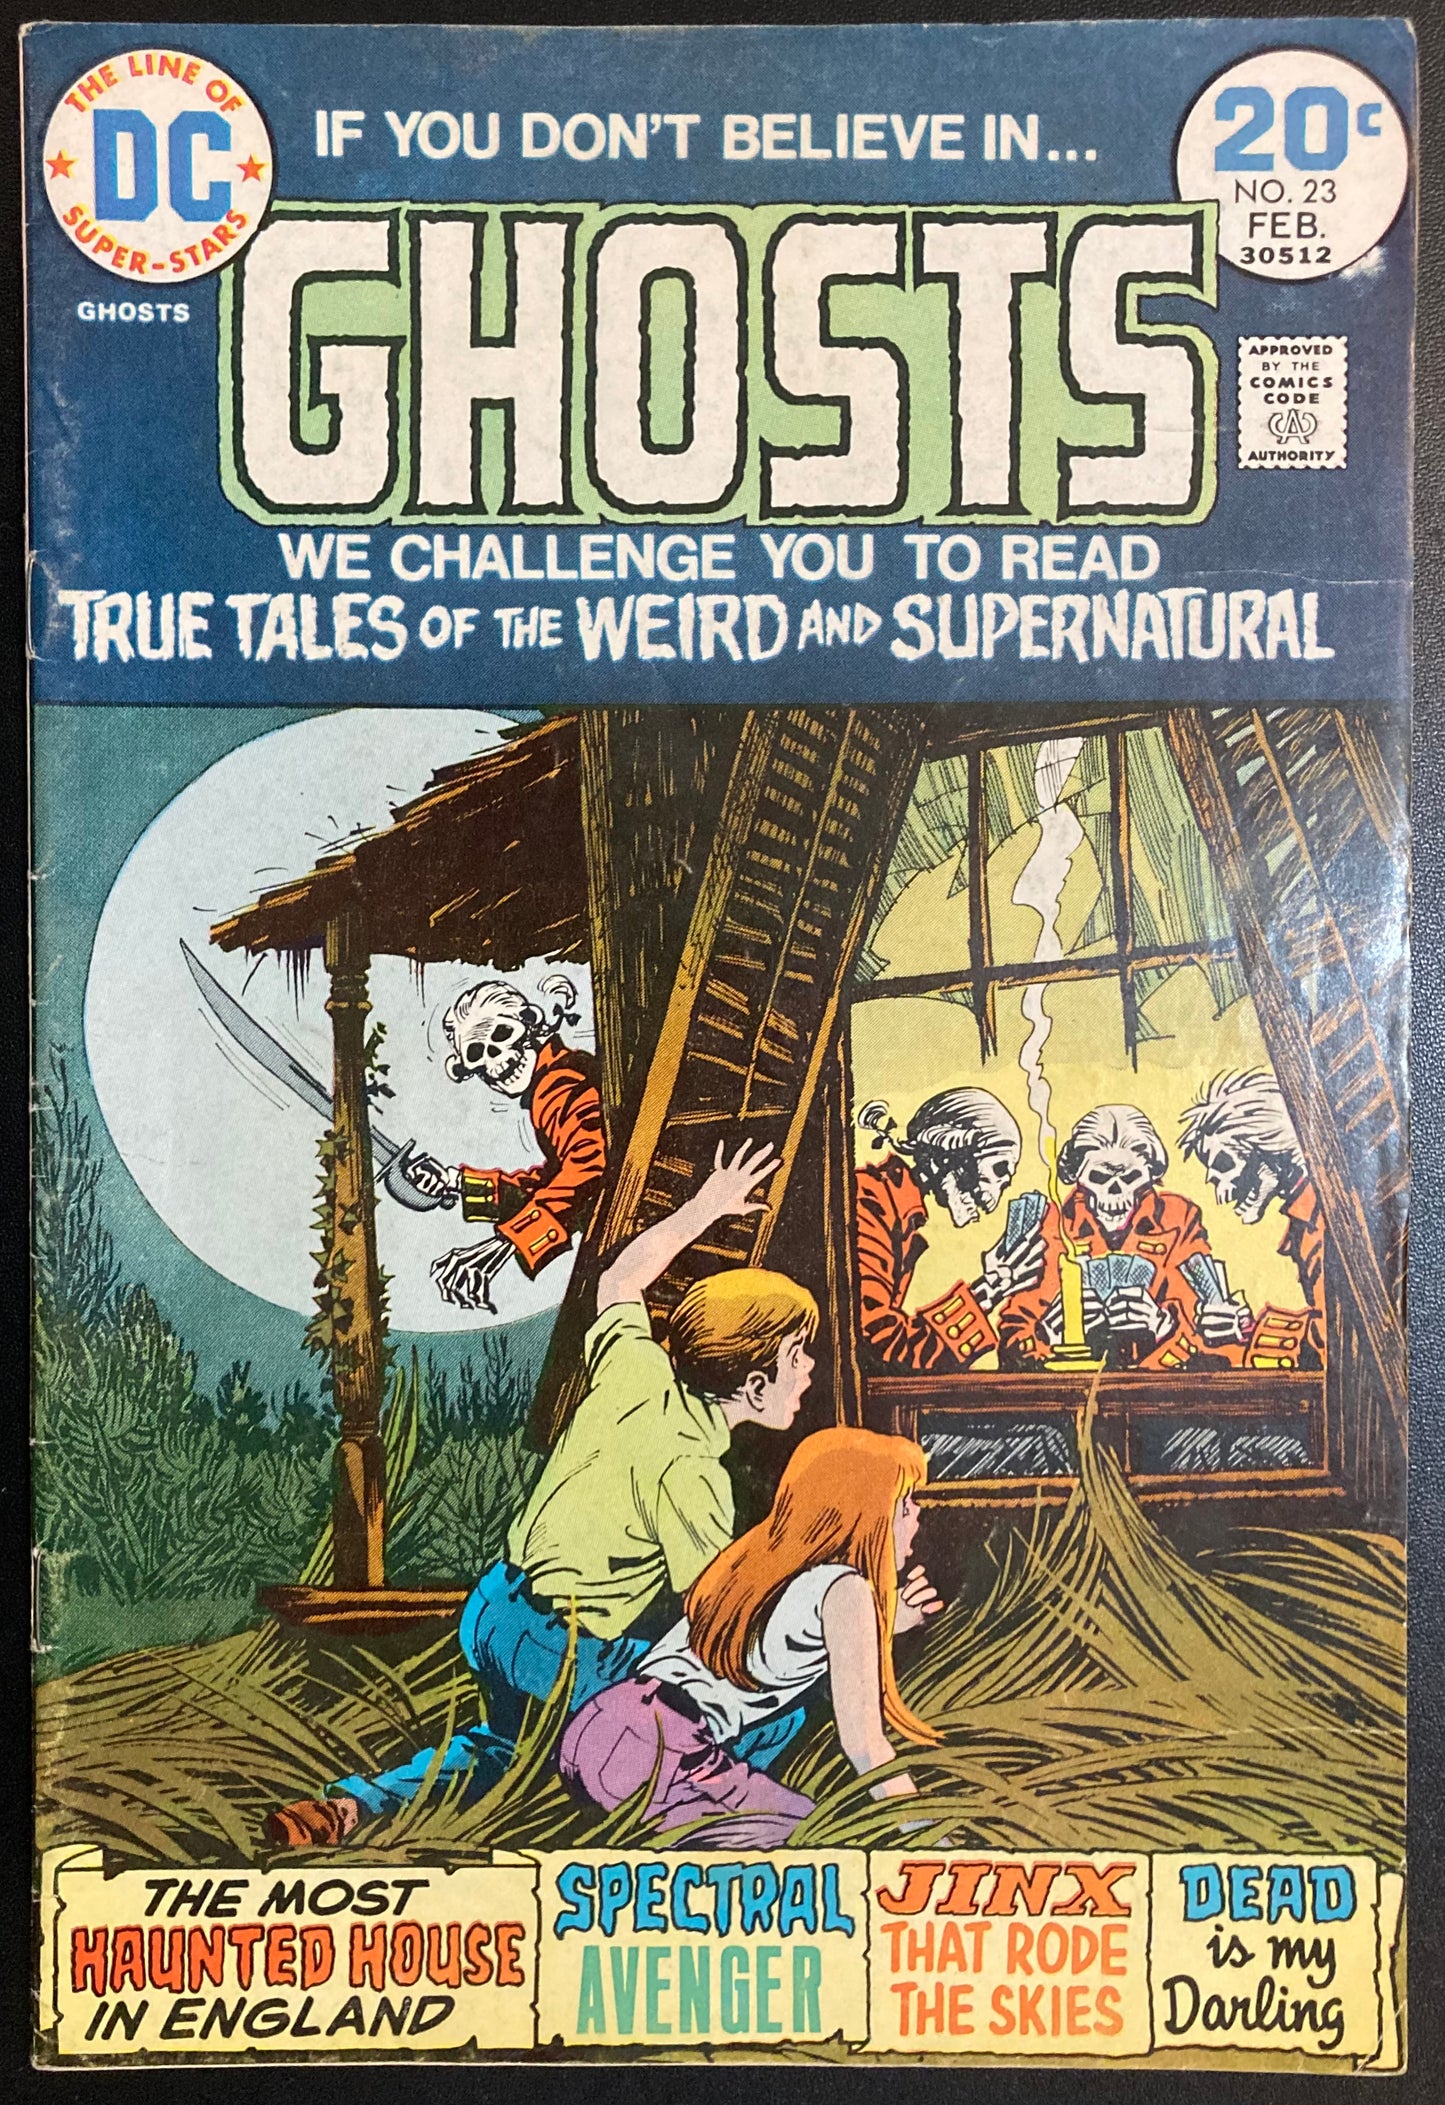 DC Ghosts #23